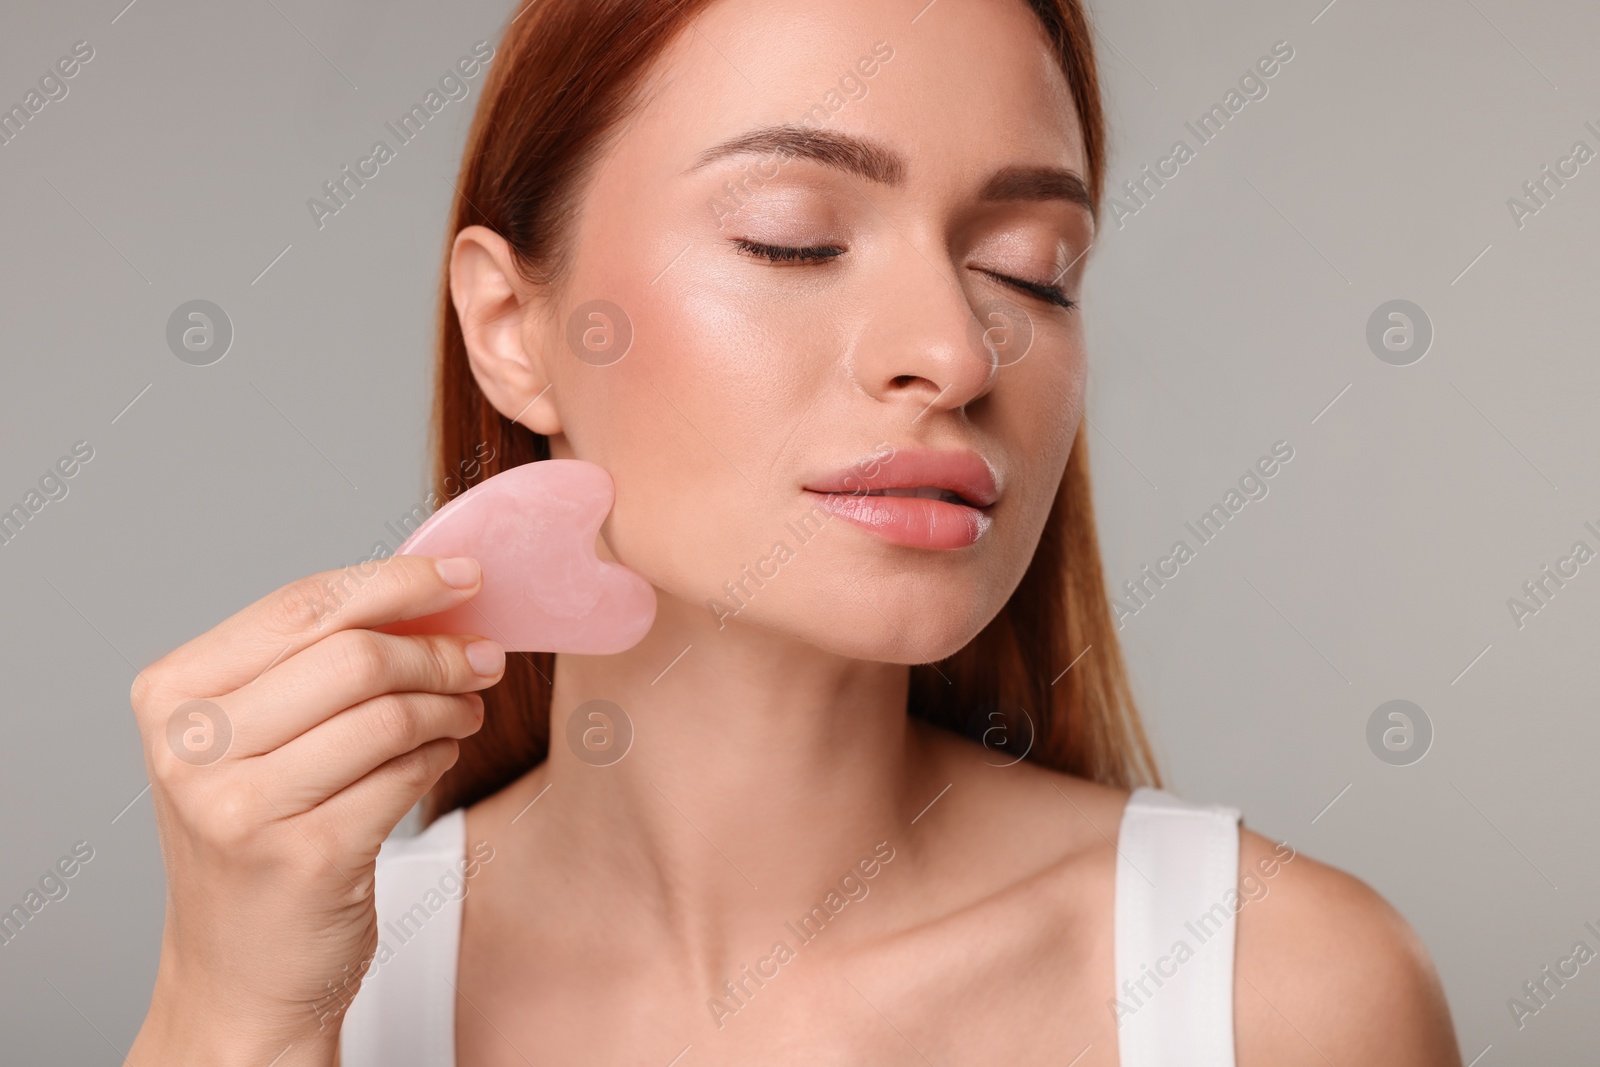 Photo of Young woman massaging her face with rose quartz gua sha tool on grey background